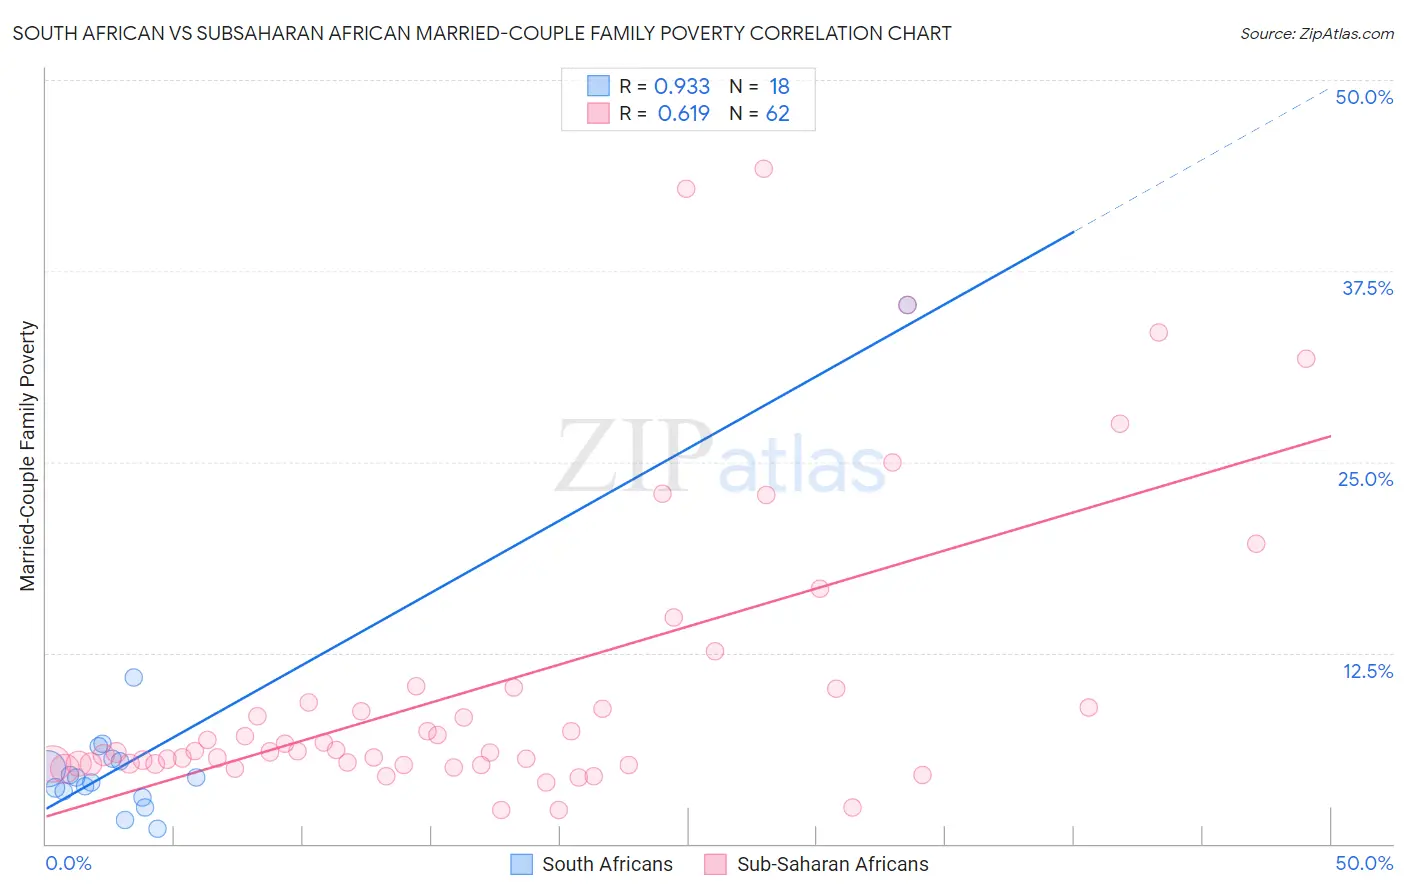 South African vs Subsaharan African Married-Couple Family Poverty